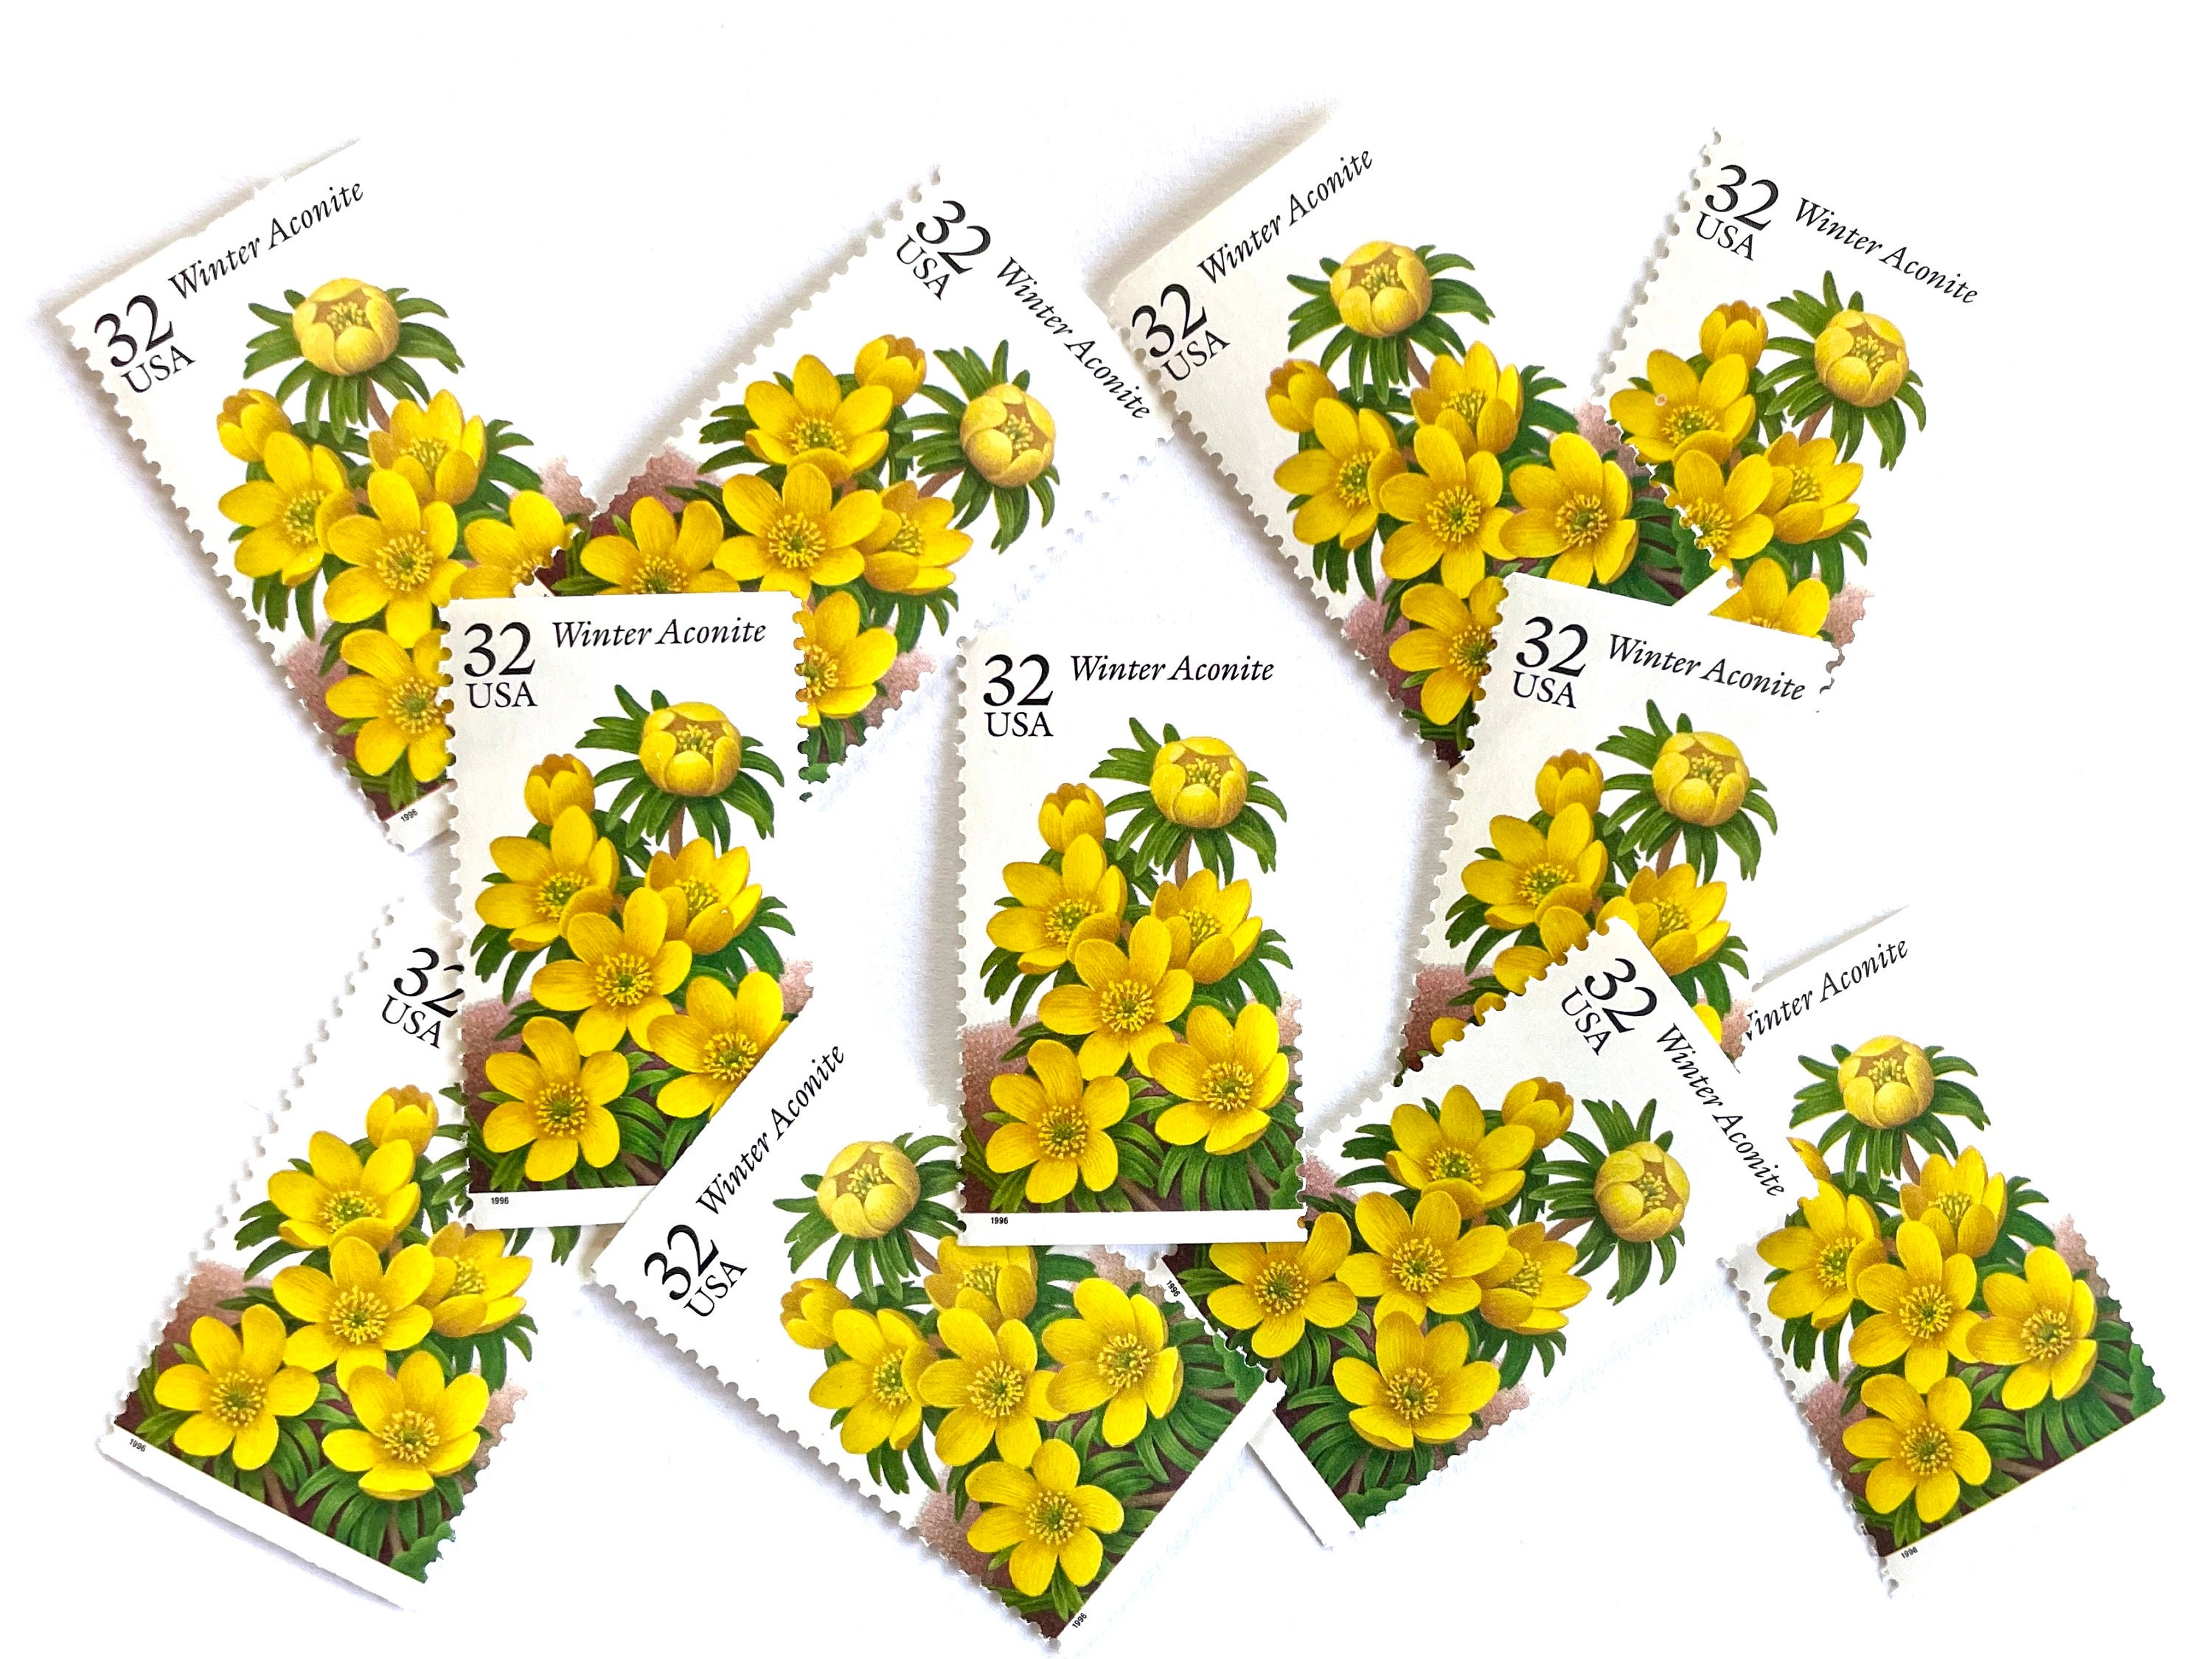 10 Vintage Yellow Flower Stamps // Unused Winter Aconite Floral Postage //  32 Cent Botanical Stamps for Mailing